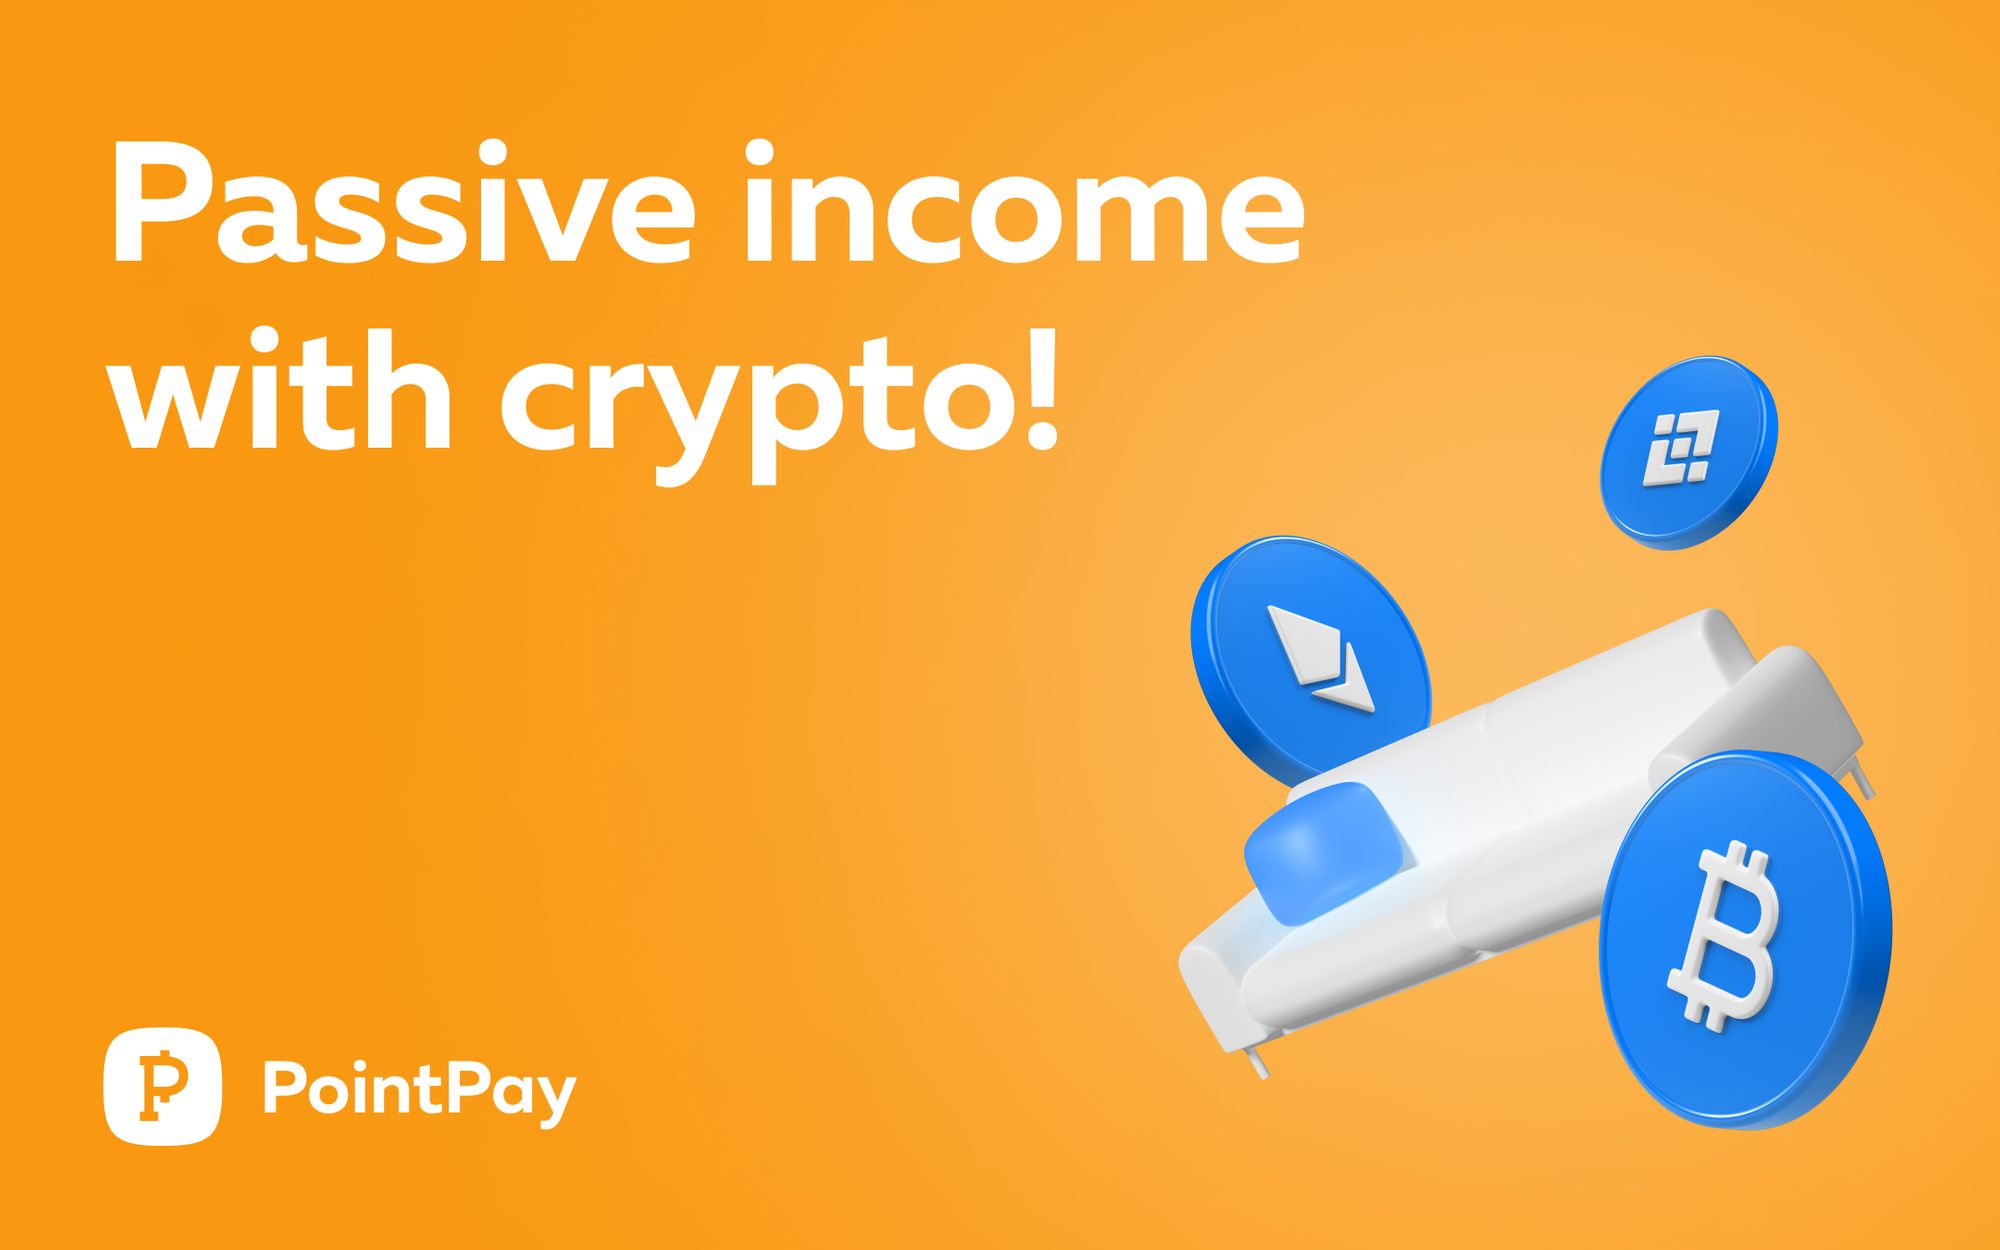 Several strategies to make passive income with crypto